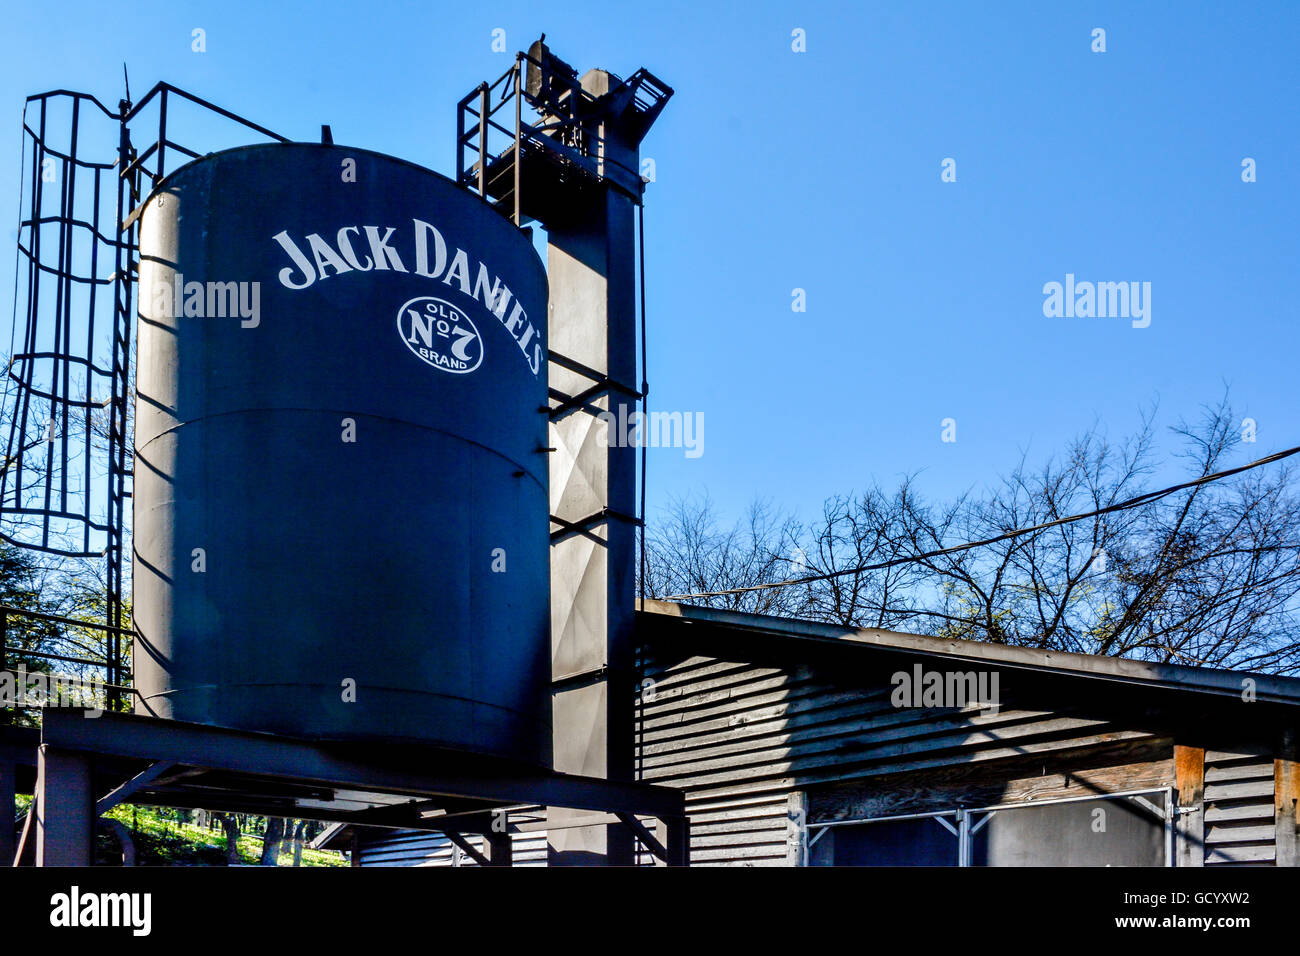 A Black liquid holding tank used in the manufacturing of whiskey at the Jack Daniels Distillery tour in Lynchburg, TN Stock Photo